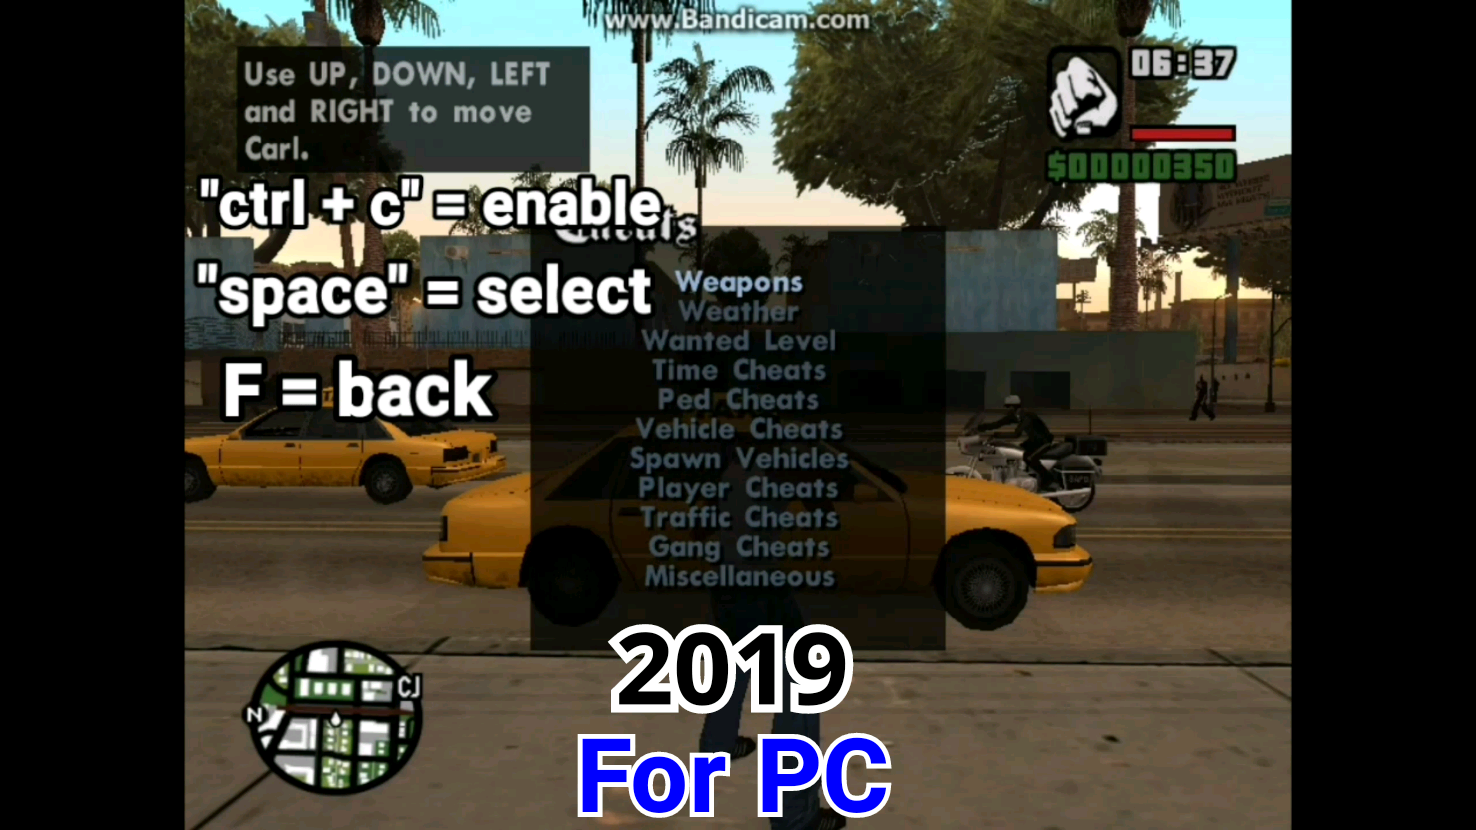 how to install gta san andreas mods